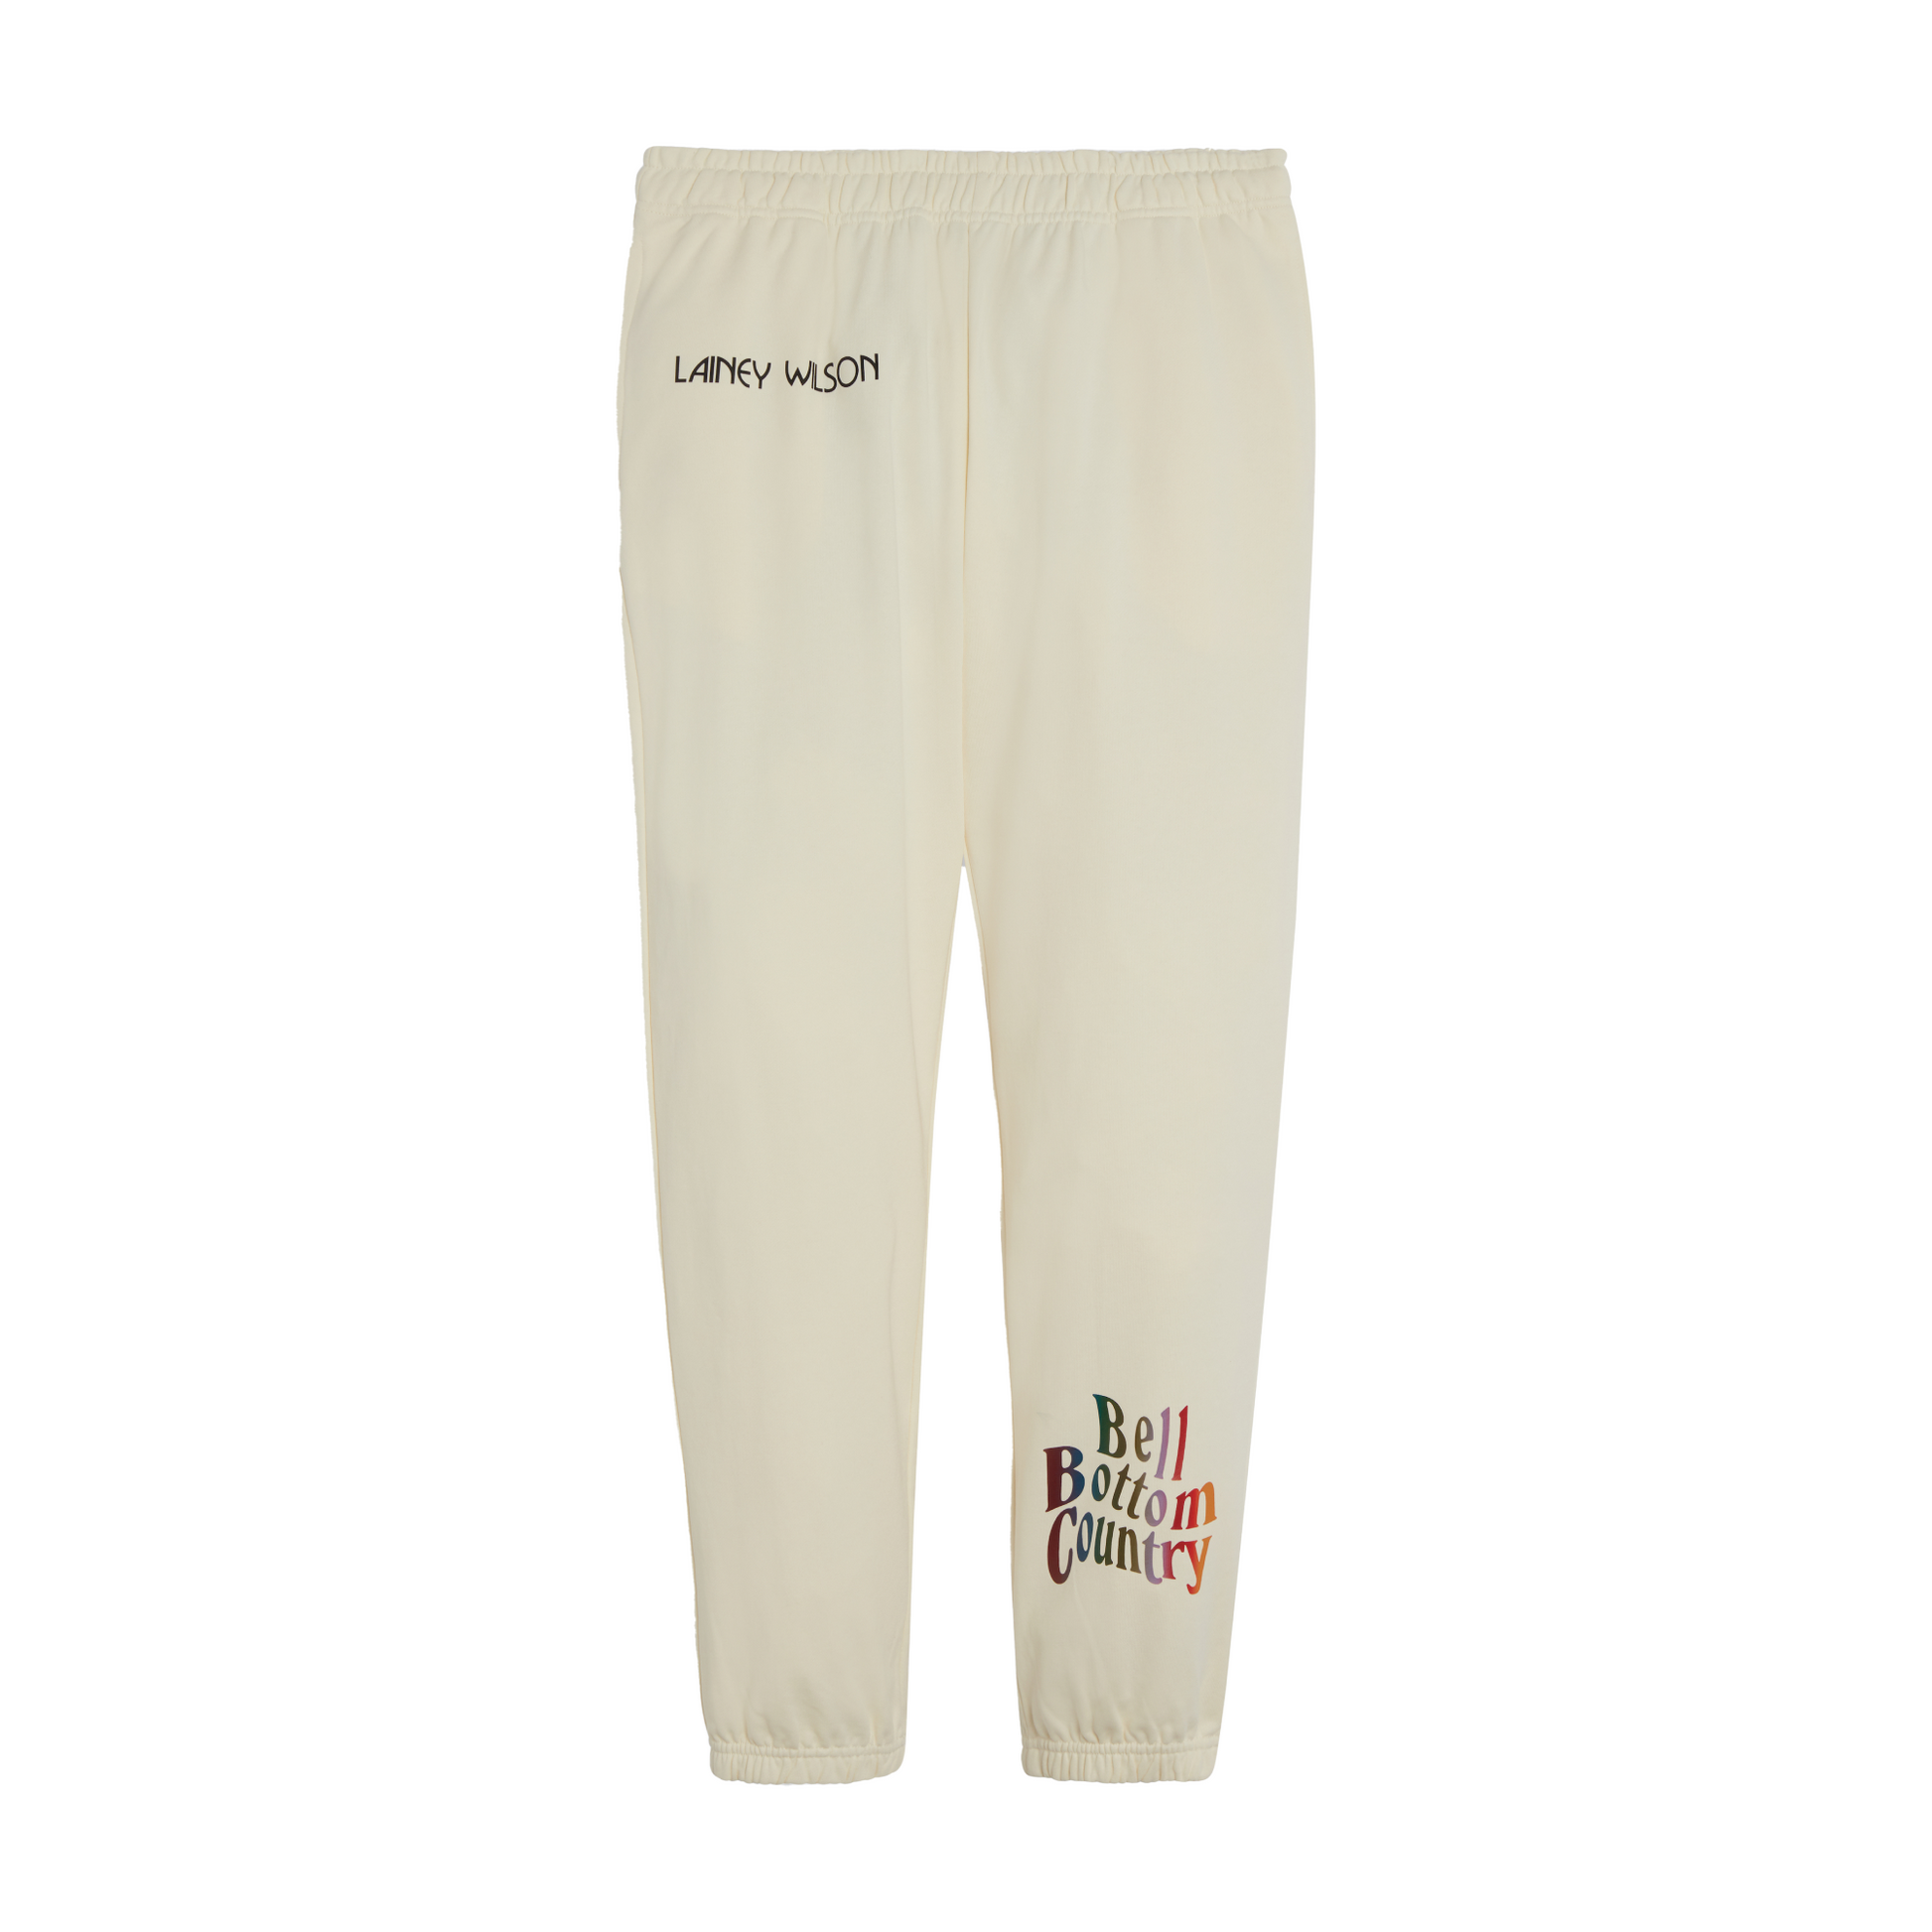 Bell Bottom Country Sweatpants – Lainey Wilson